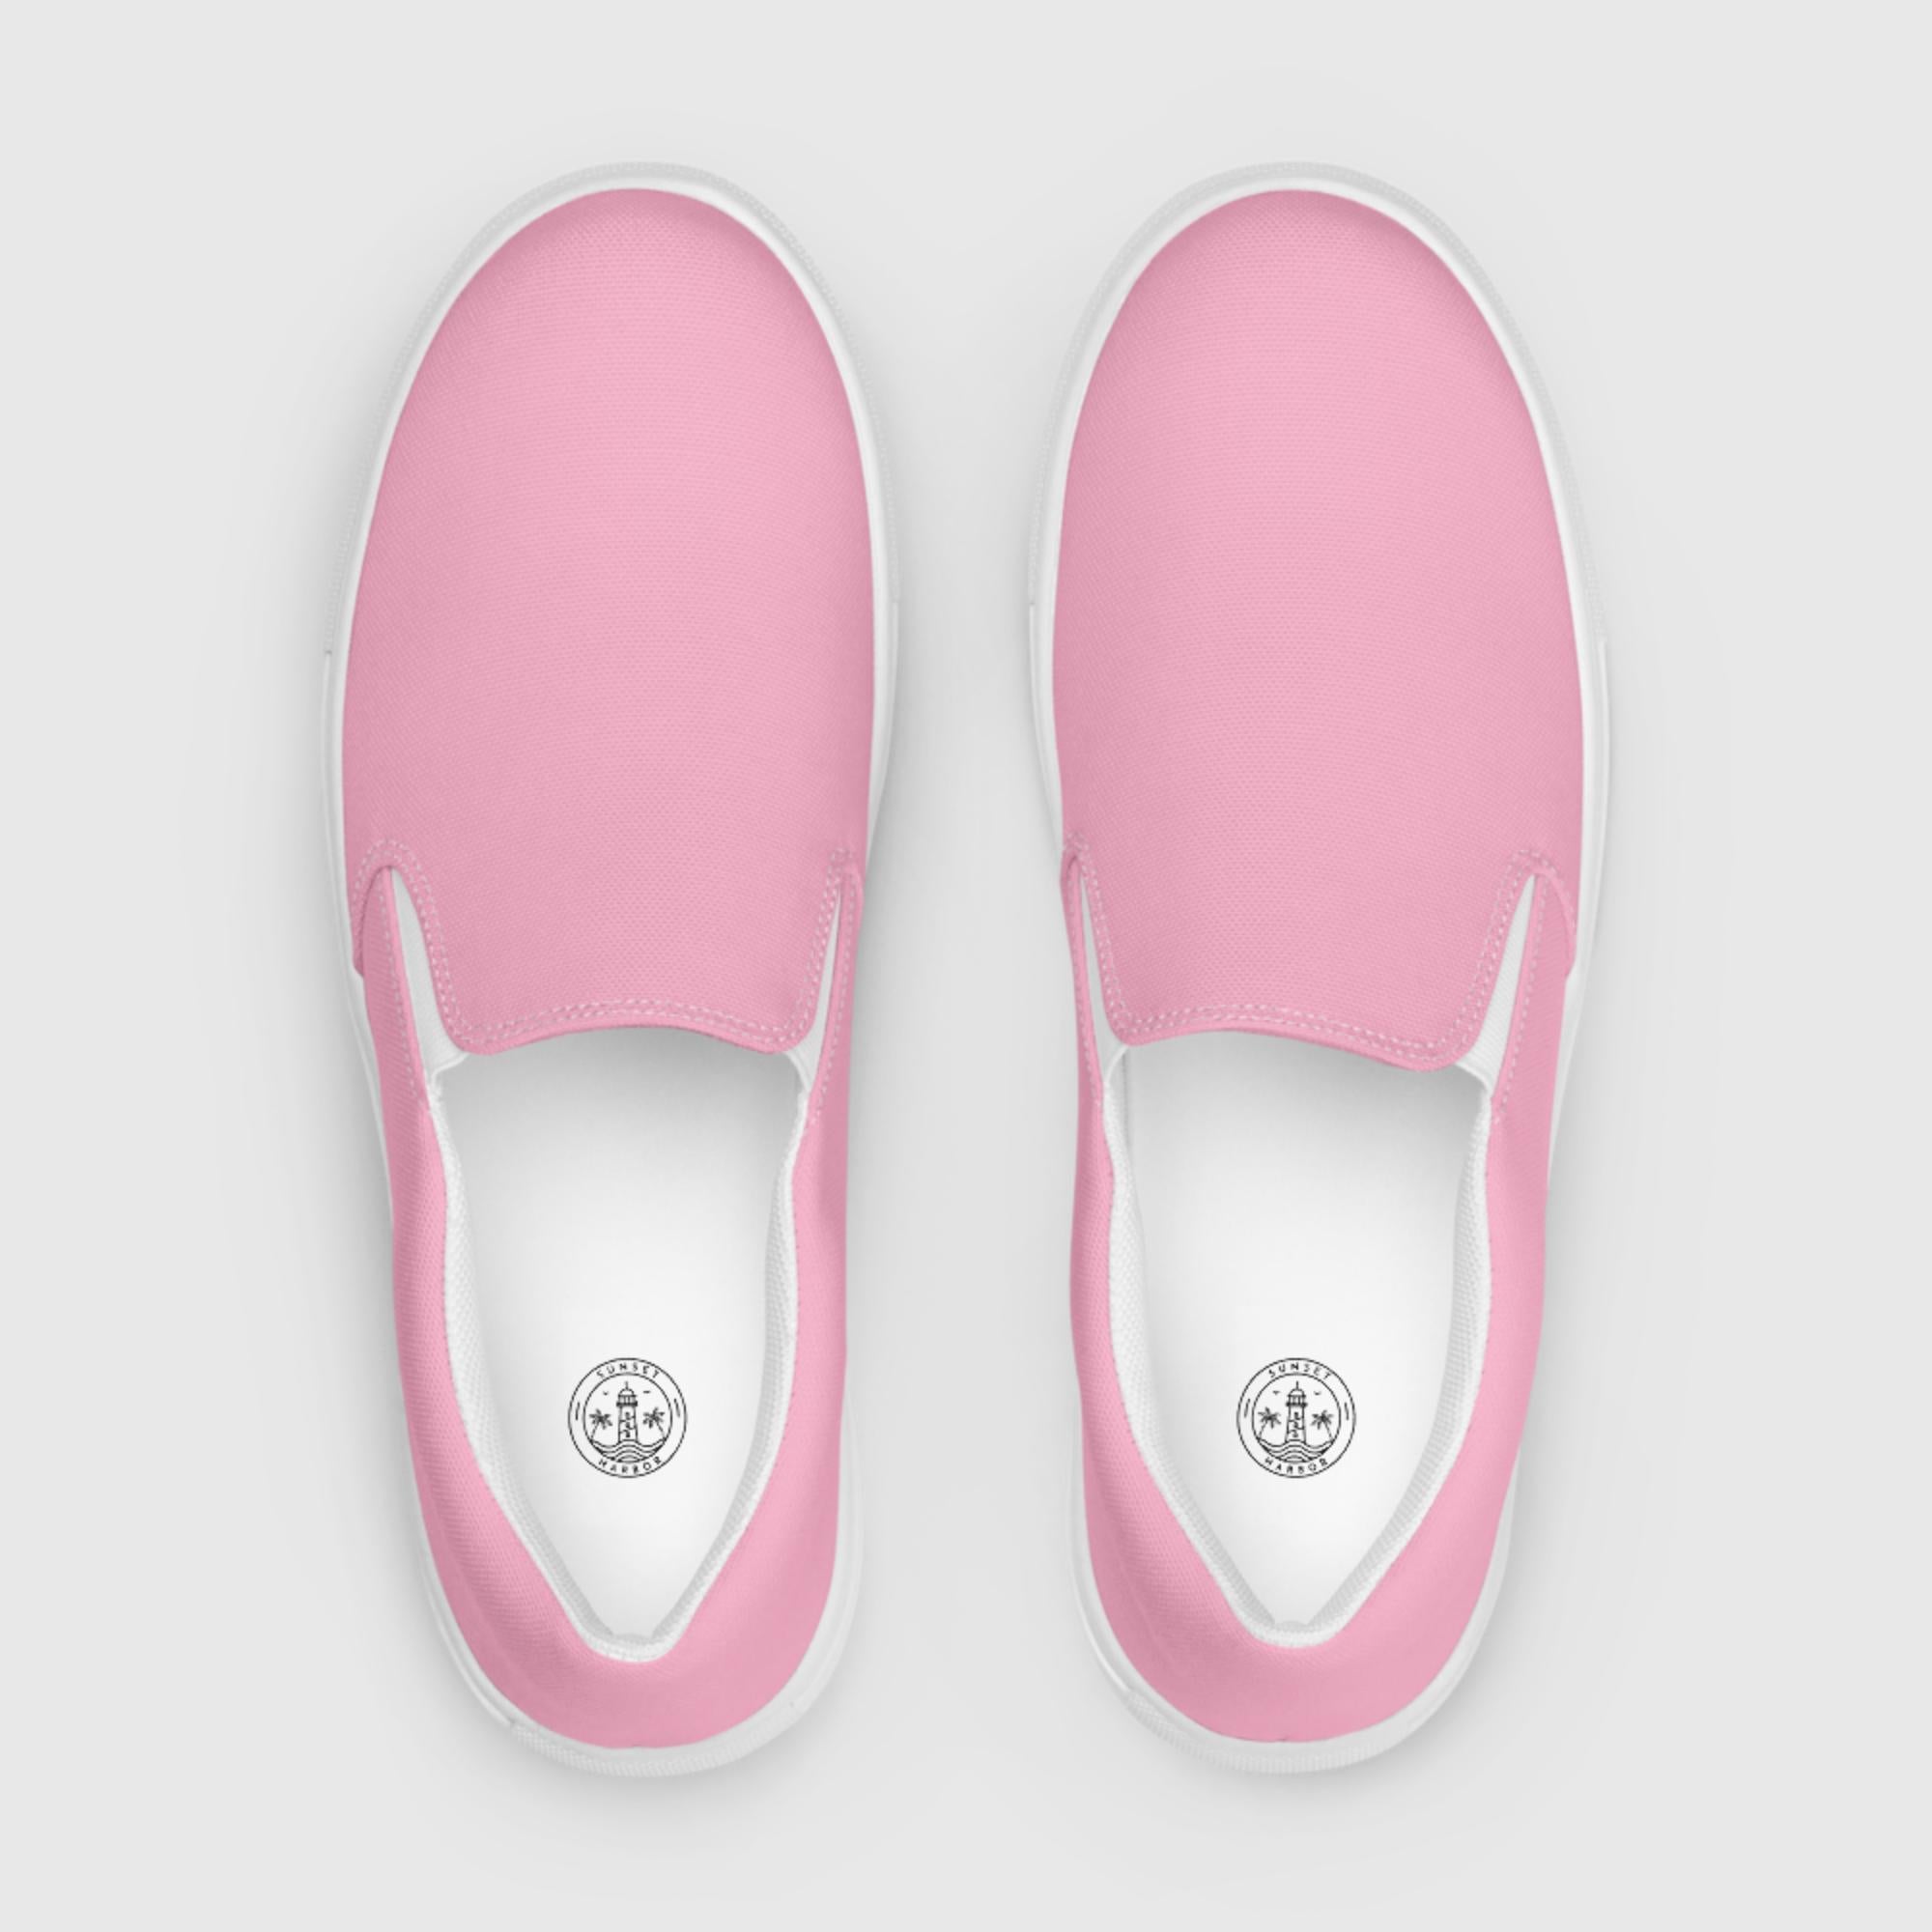 Women’s slip-on canvas shoes - Pink - Sunset Harbor Clothing